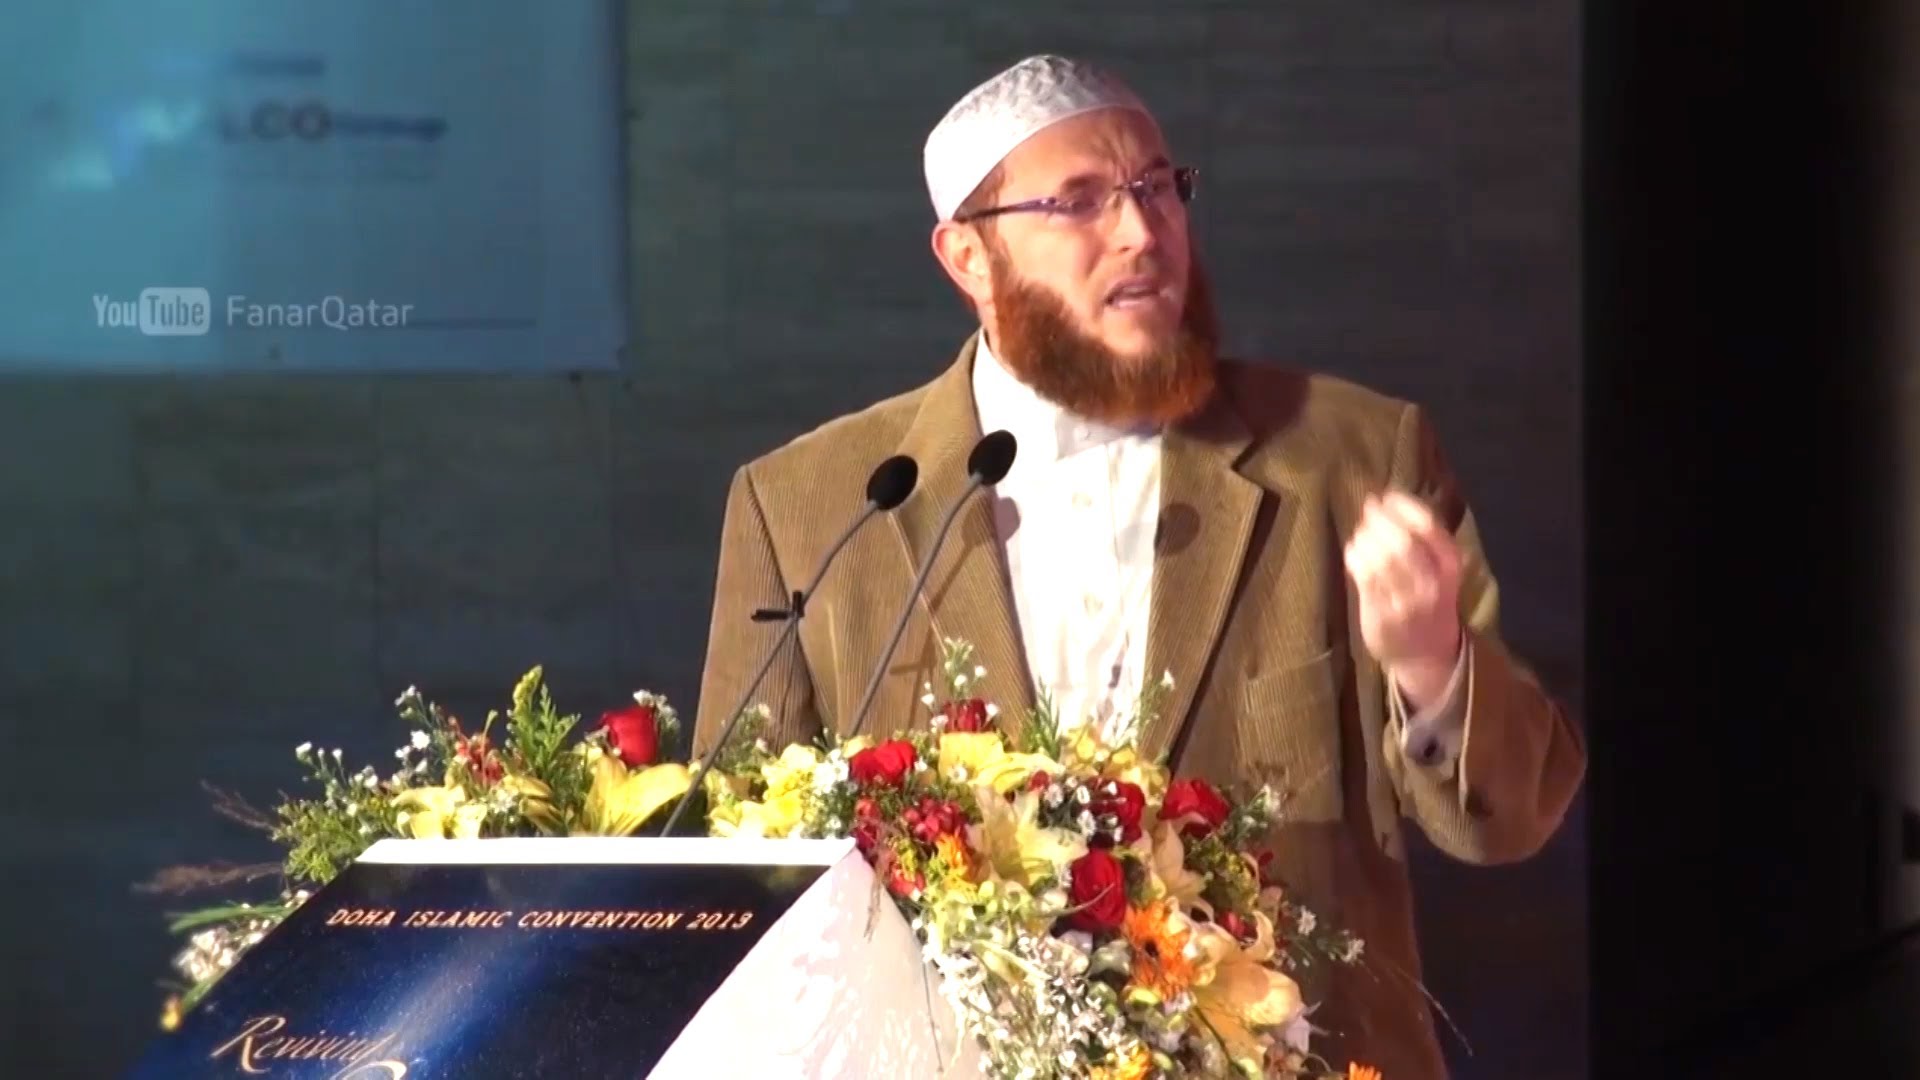 Changing our Condition - Dr. Muhammad Salah - Doha Islamic Convention 2013